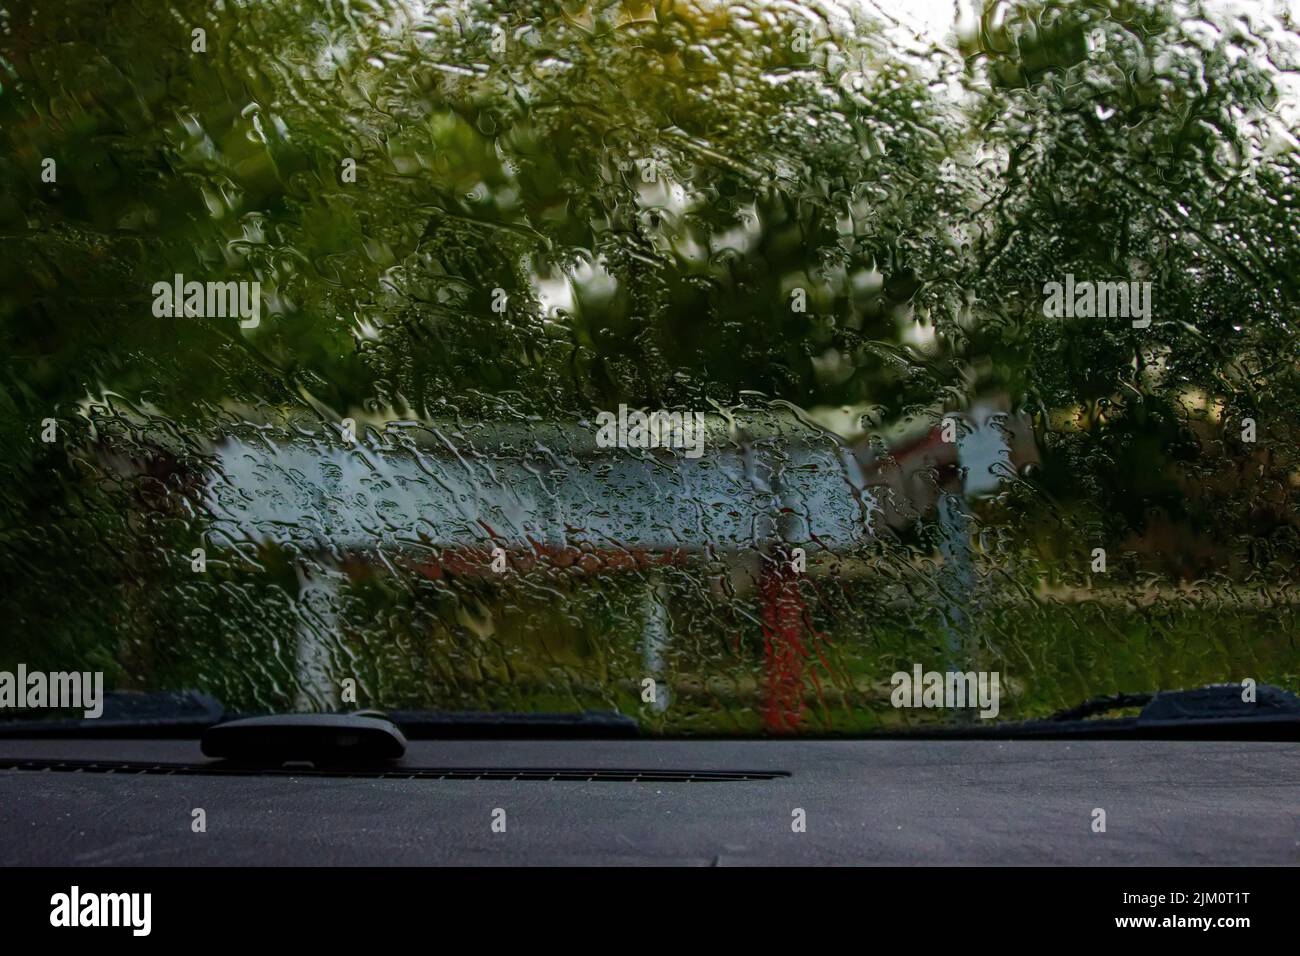 A closeup of a rainy car windshield looking out into a park with a Bluetooth earpiece on the dashboard Stock Photo